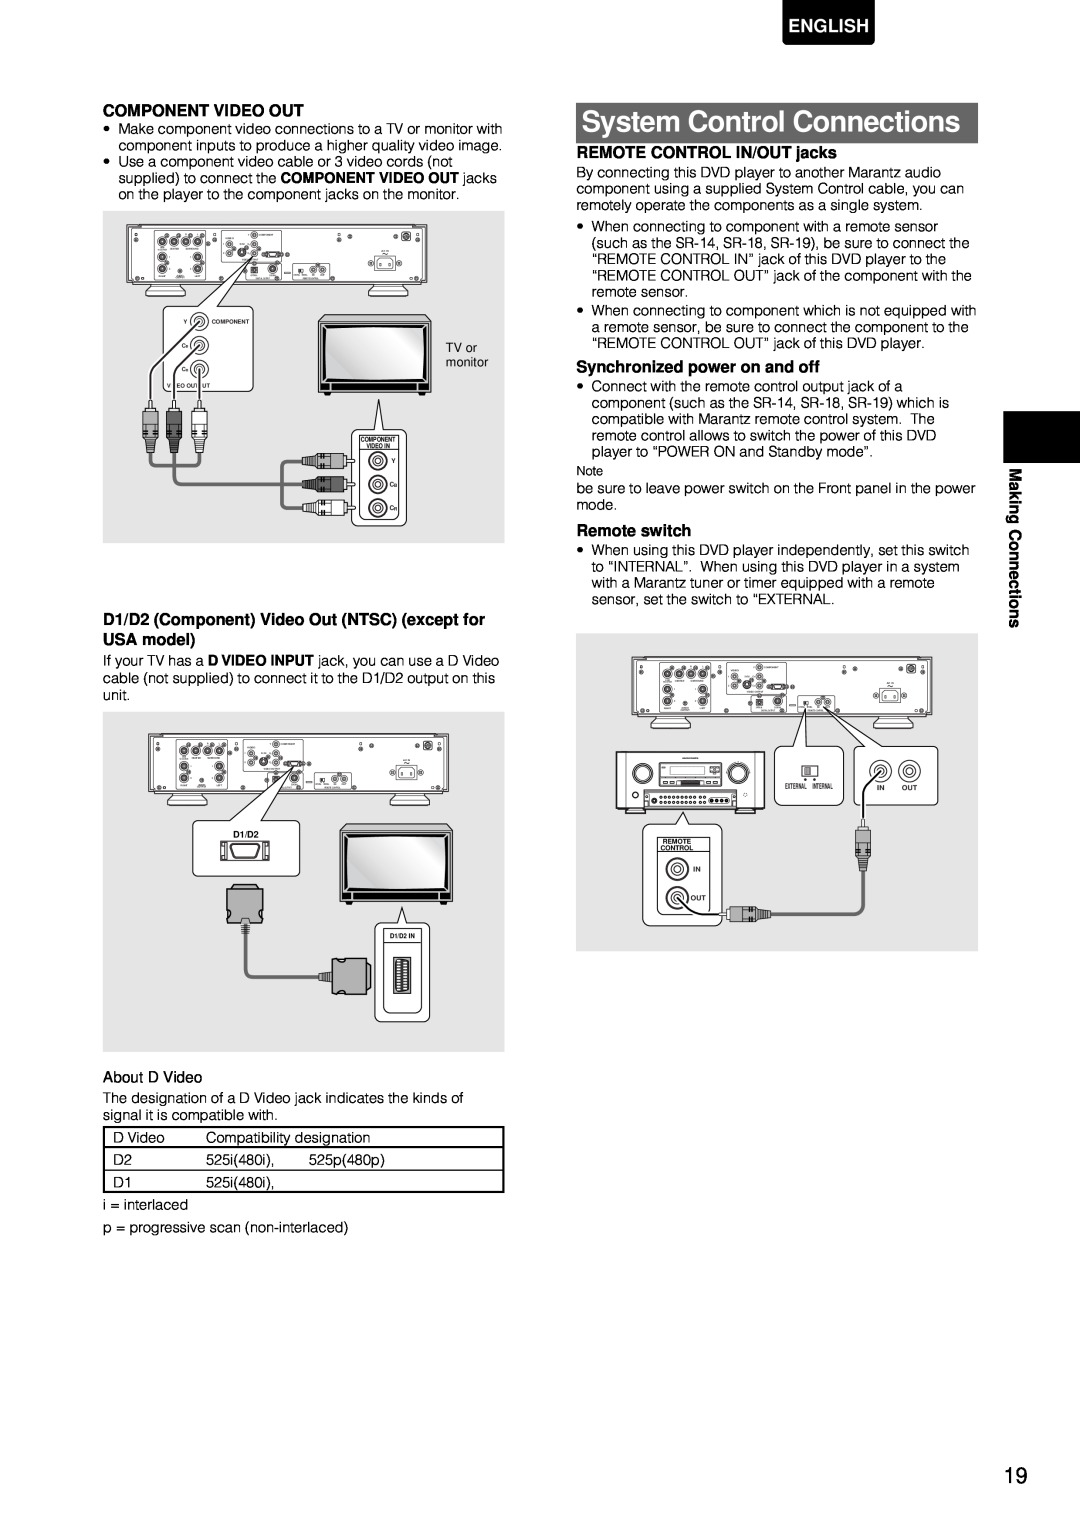 Marantz DV-12S1 manual System Control Connections, D1/D2 Component Video Out NTSC except for USA model, Remote switch 